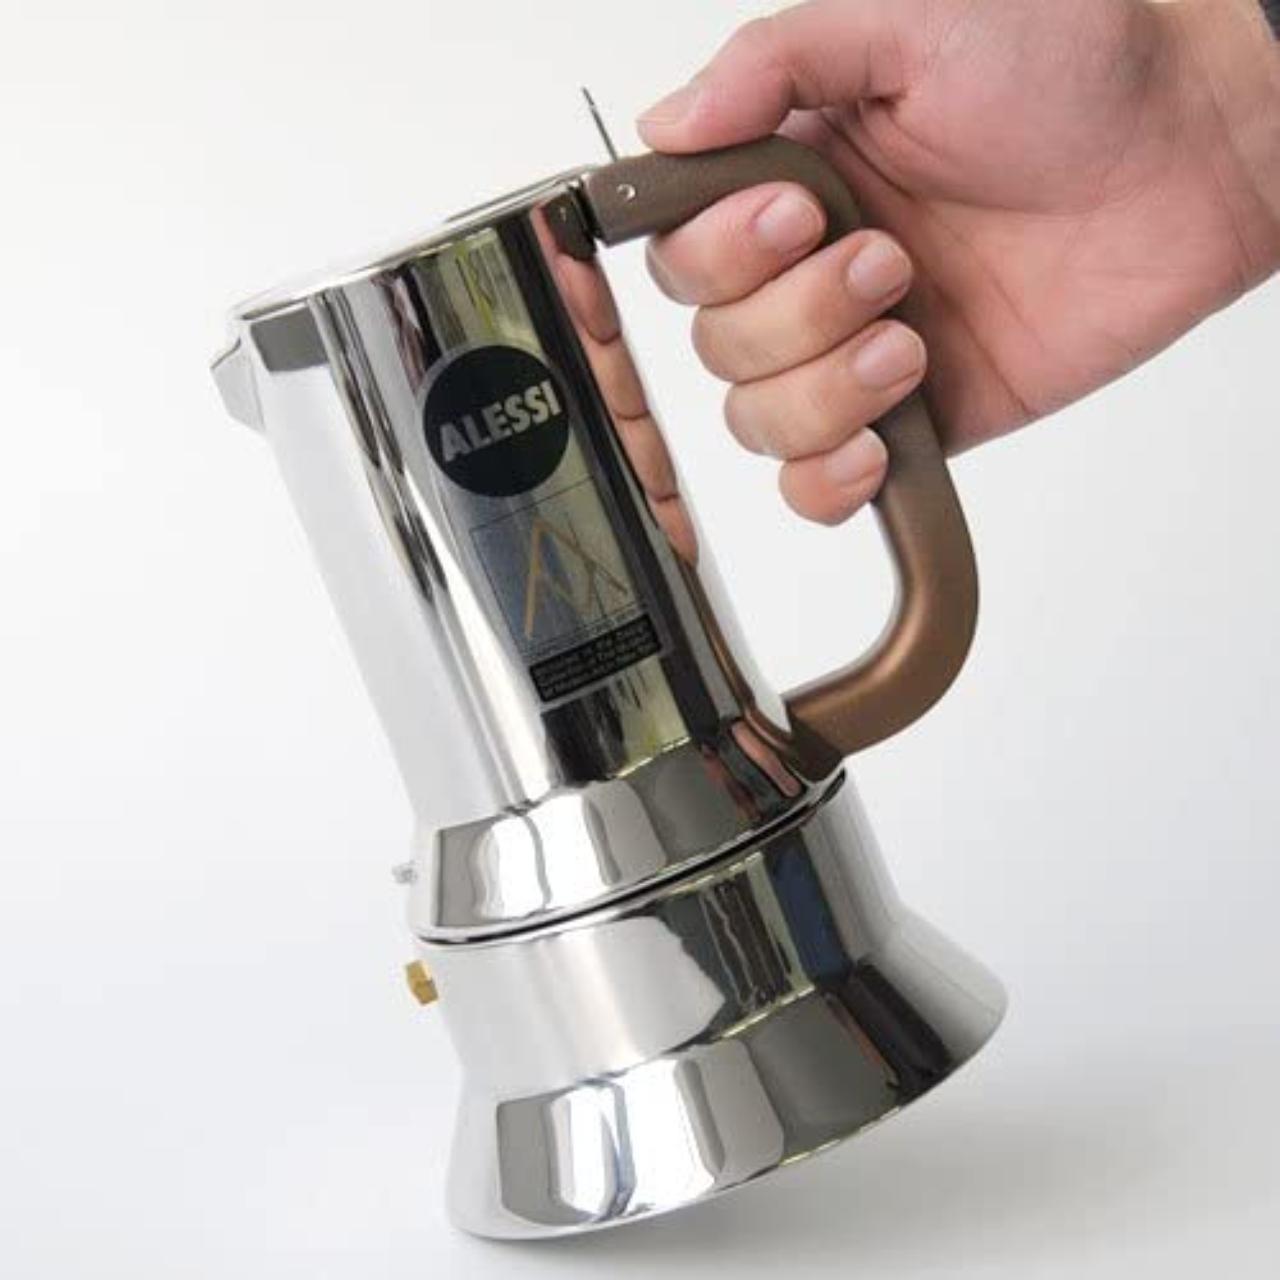 Product Image 2 - Alessi Espresso Maker 9090 by